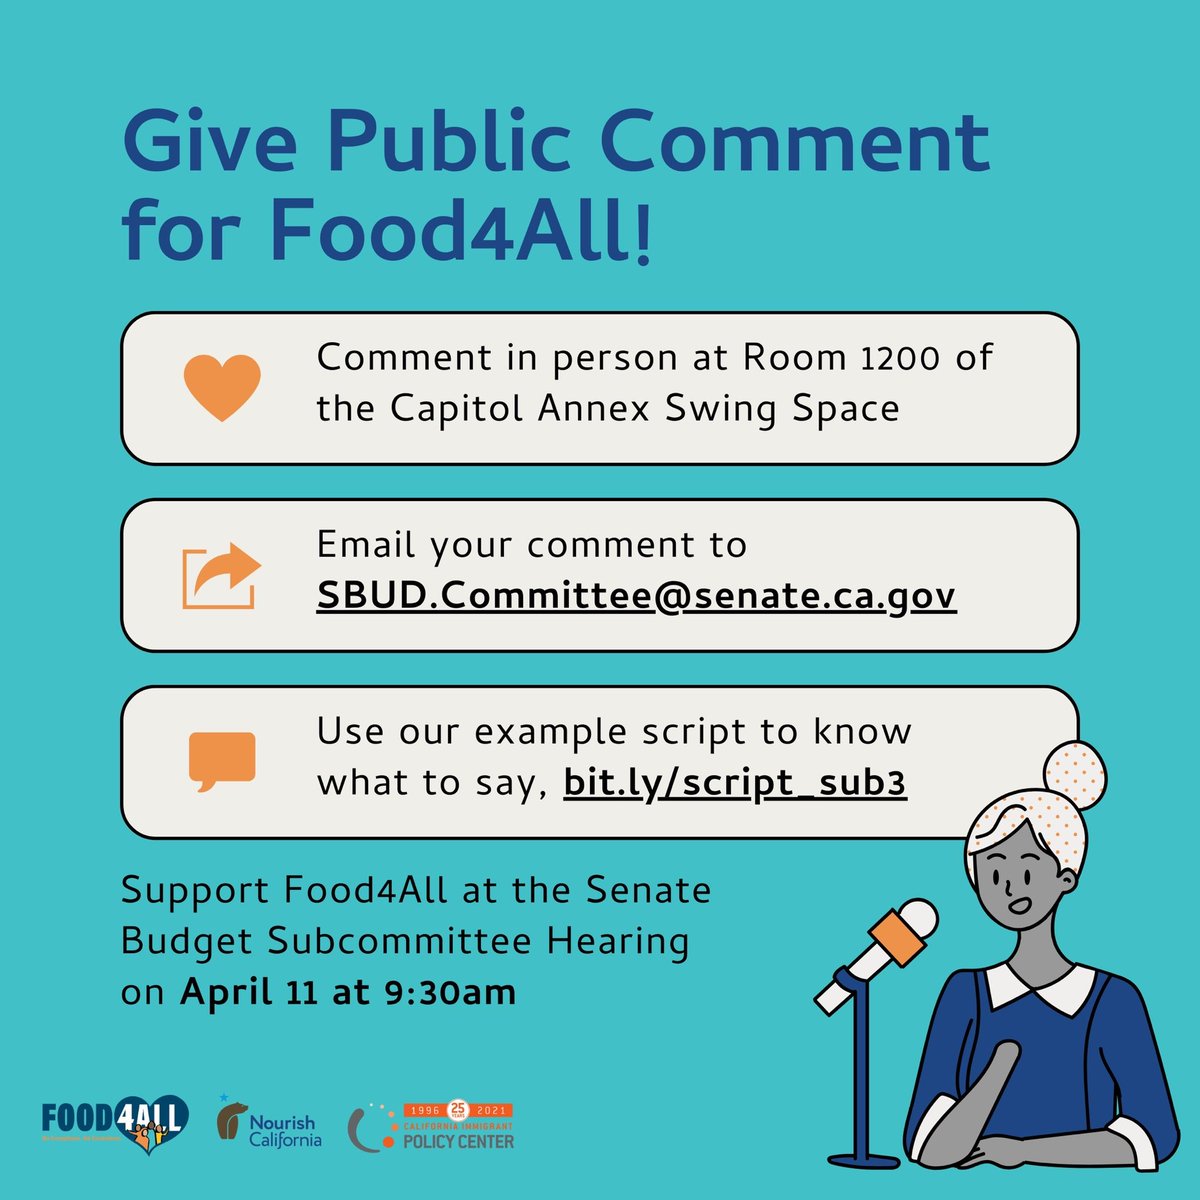 2 out of 3 undocumented children = affected by #FoodInsecurity, yet are excluded from our food safety net. Support #Food4All by giving public comment at the Senate hearing on 4/11! Use our script in person/over email - bit.ly/script_sub3 #NoExceptionsNoExclusions #NoDelays